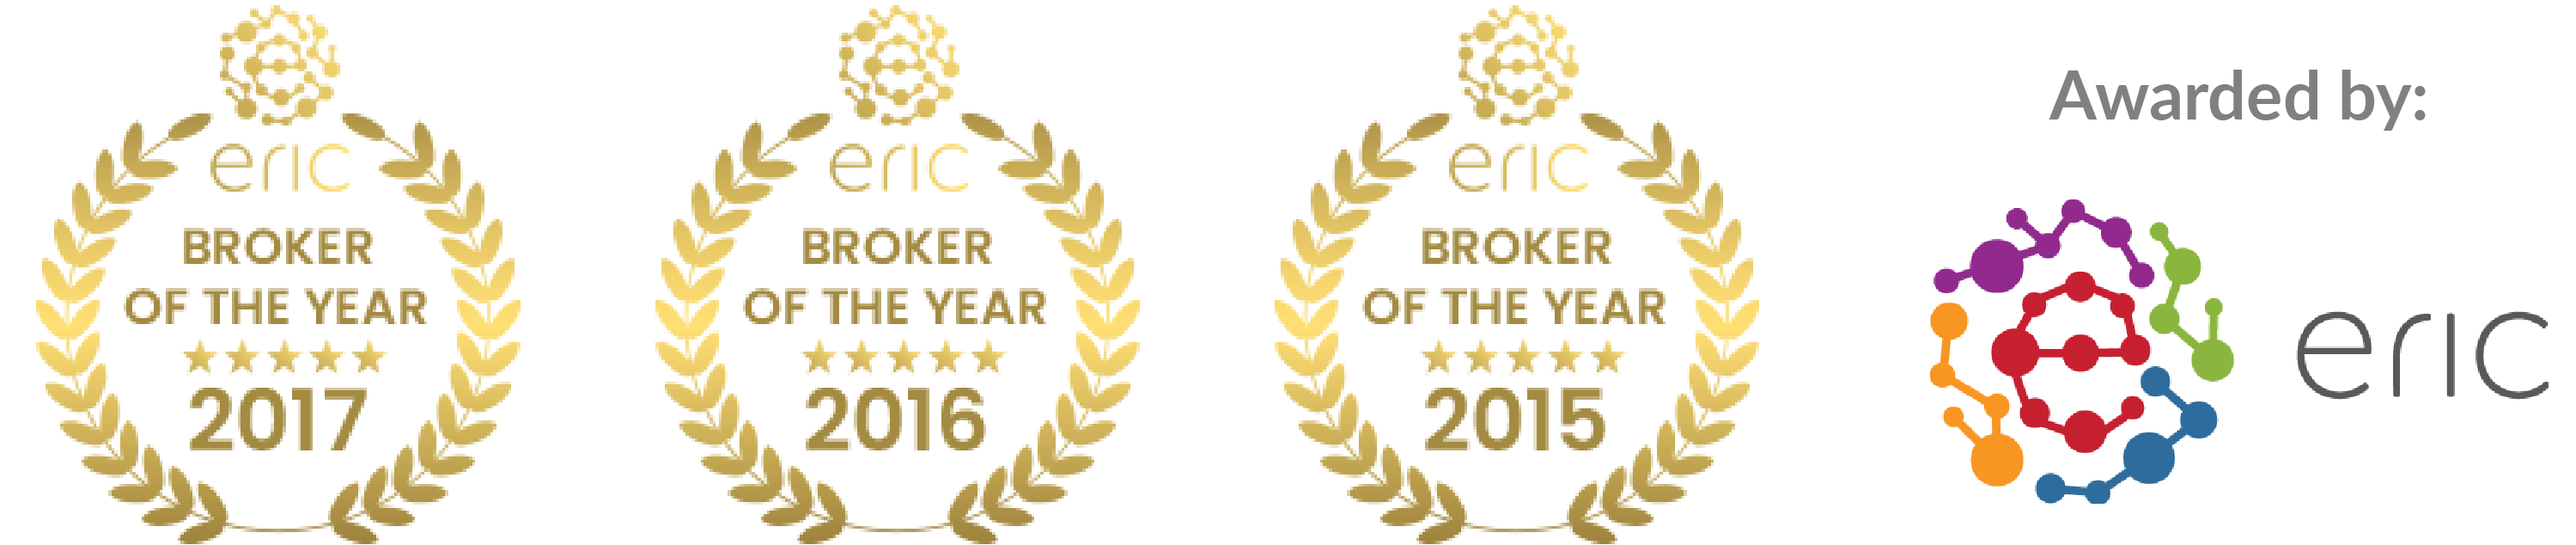 Credit One - Broker of the Year